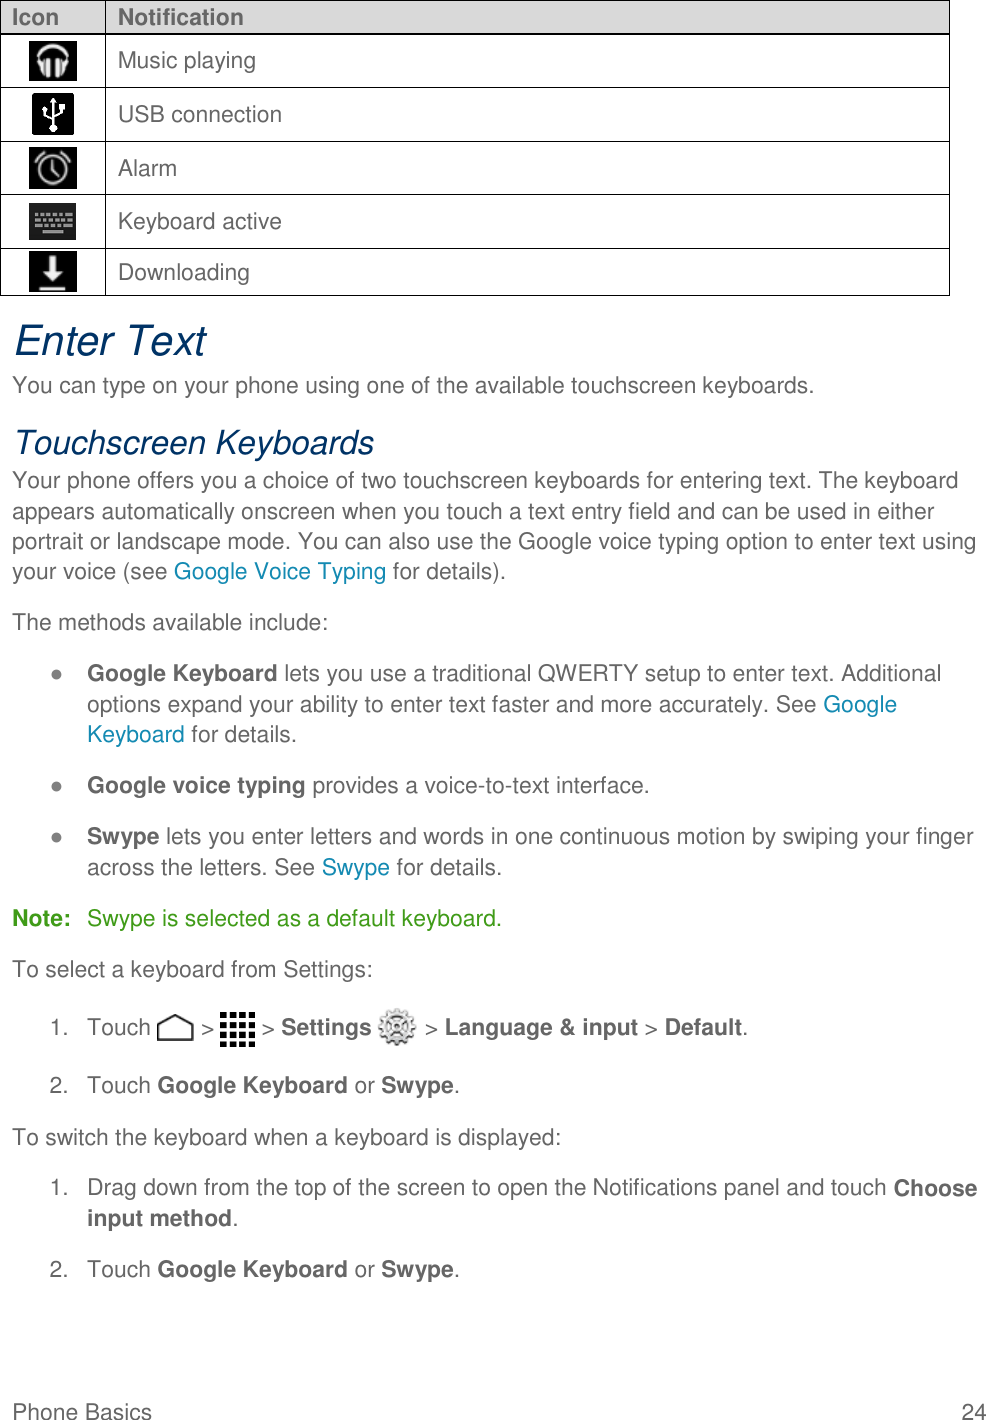 Phone Basics  24 Icon Notification  Music playing  USB connection  Alarm  Keyboard active  Downloading Enter Text You can type on your phone using one of the available touchscreen keyboards. Touchscreen Keyboards Your phone offers you a choice of two touchscreen keyboards for entering text. The keyboard appears automatically onscreen when you touch a text entry field and can be used in either portrait or landscape mode. You can also use the Google voice typing option to enter text using your voice (see Google Voice Typing for details). The methods available include: ● Google Keyboard lets you use a traditional QWERTY setup to enter text. Additional options expand your ability to enter text faster and more accurately. See Google Keyboard for details. ● Google voice typing provides a voice-to-text interface. ● Swype lets you enter letters and words in one continuous motion by swiping your finger across the letters. See Swype for details. Note:  Swype is selected as a default keyboard. To select a keyboard from Settings: 1.  Touch   &gt;   &gt; Settings   &gt; Language &amp; input &gt; Default. 2.  Touch Google Keyboard or Swype. To switch the keyboard when a keyboard is displayed: 1.  Drag down from the top of the screen to open the Notifications panel and touch Choose input method. 2.  Touch Google Keyboard or Swype. 